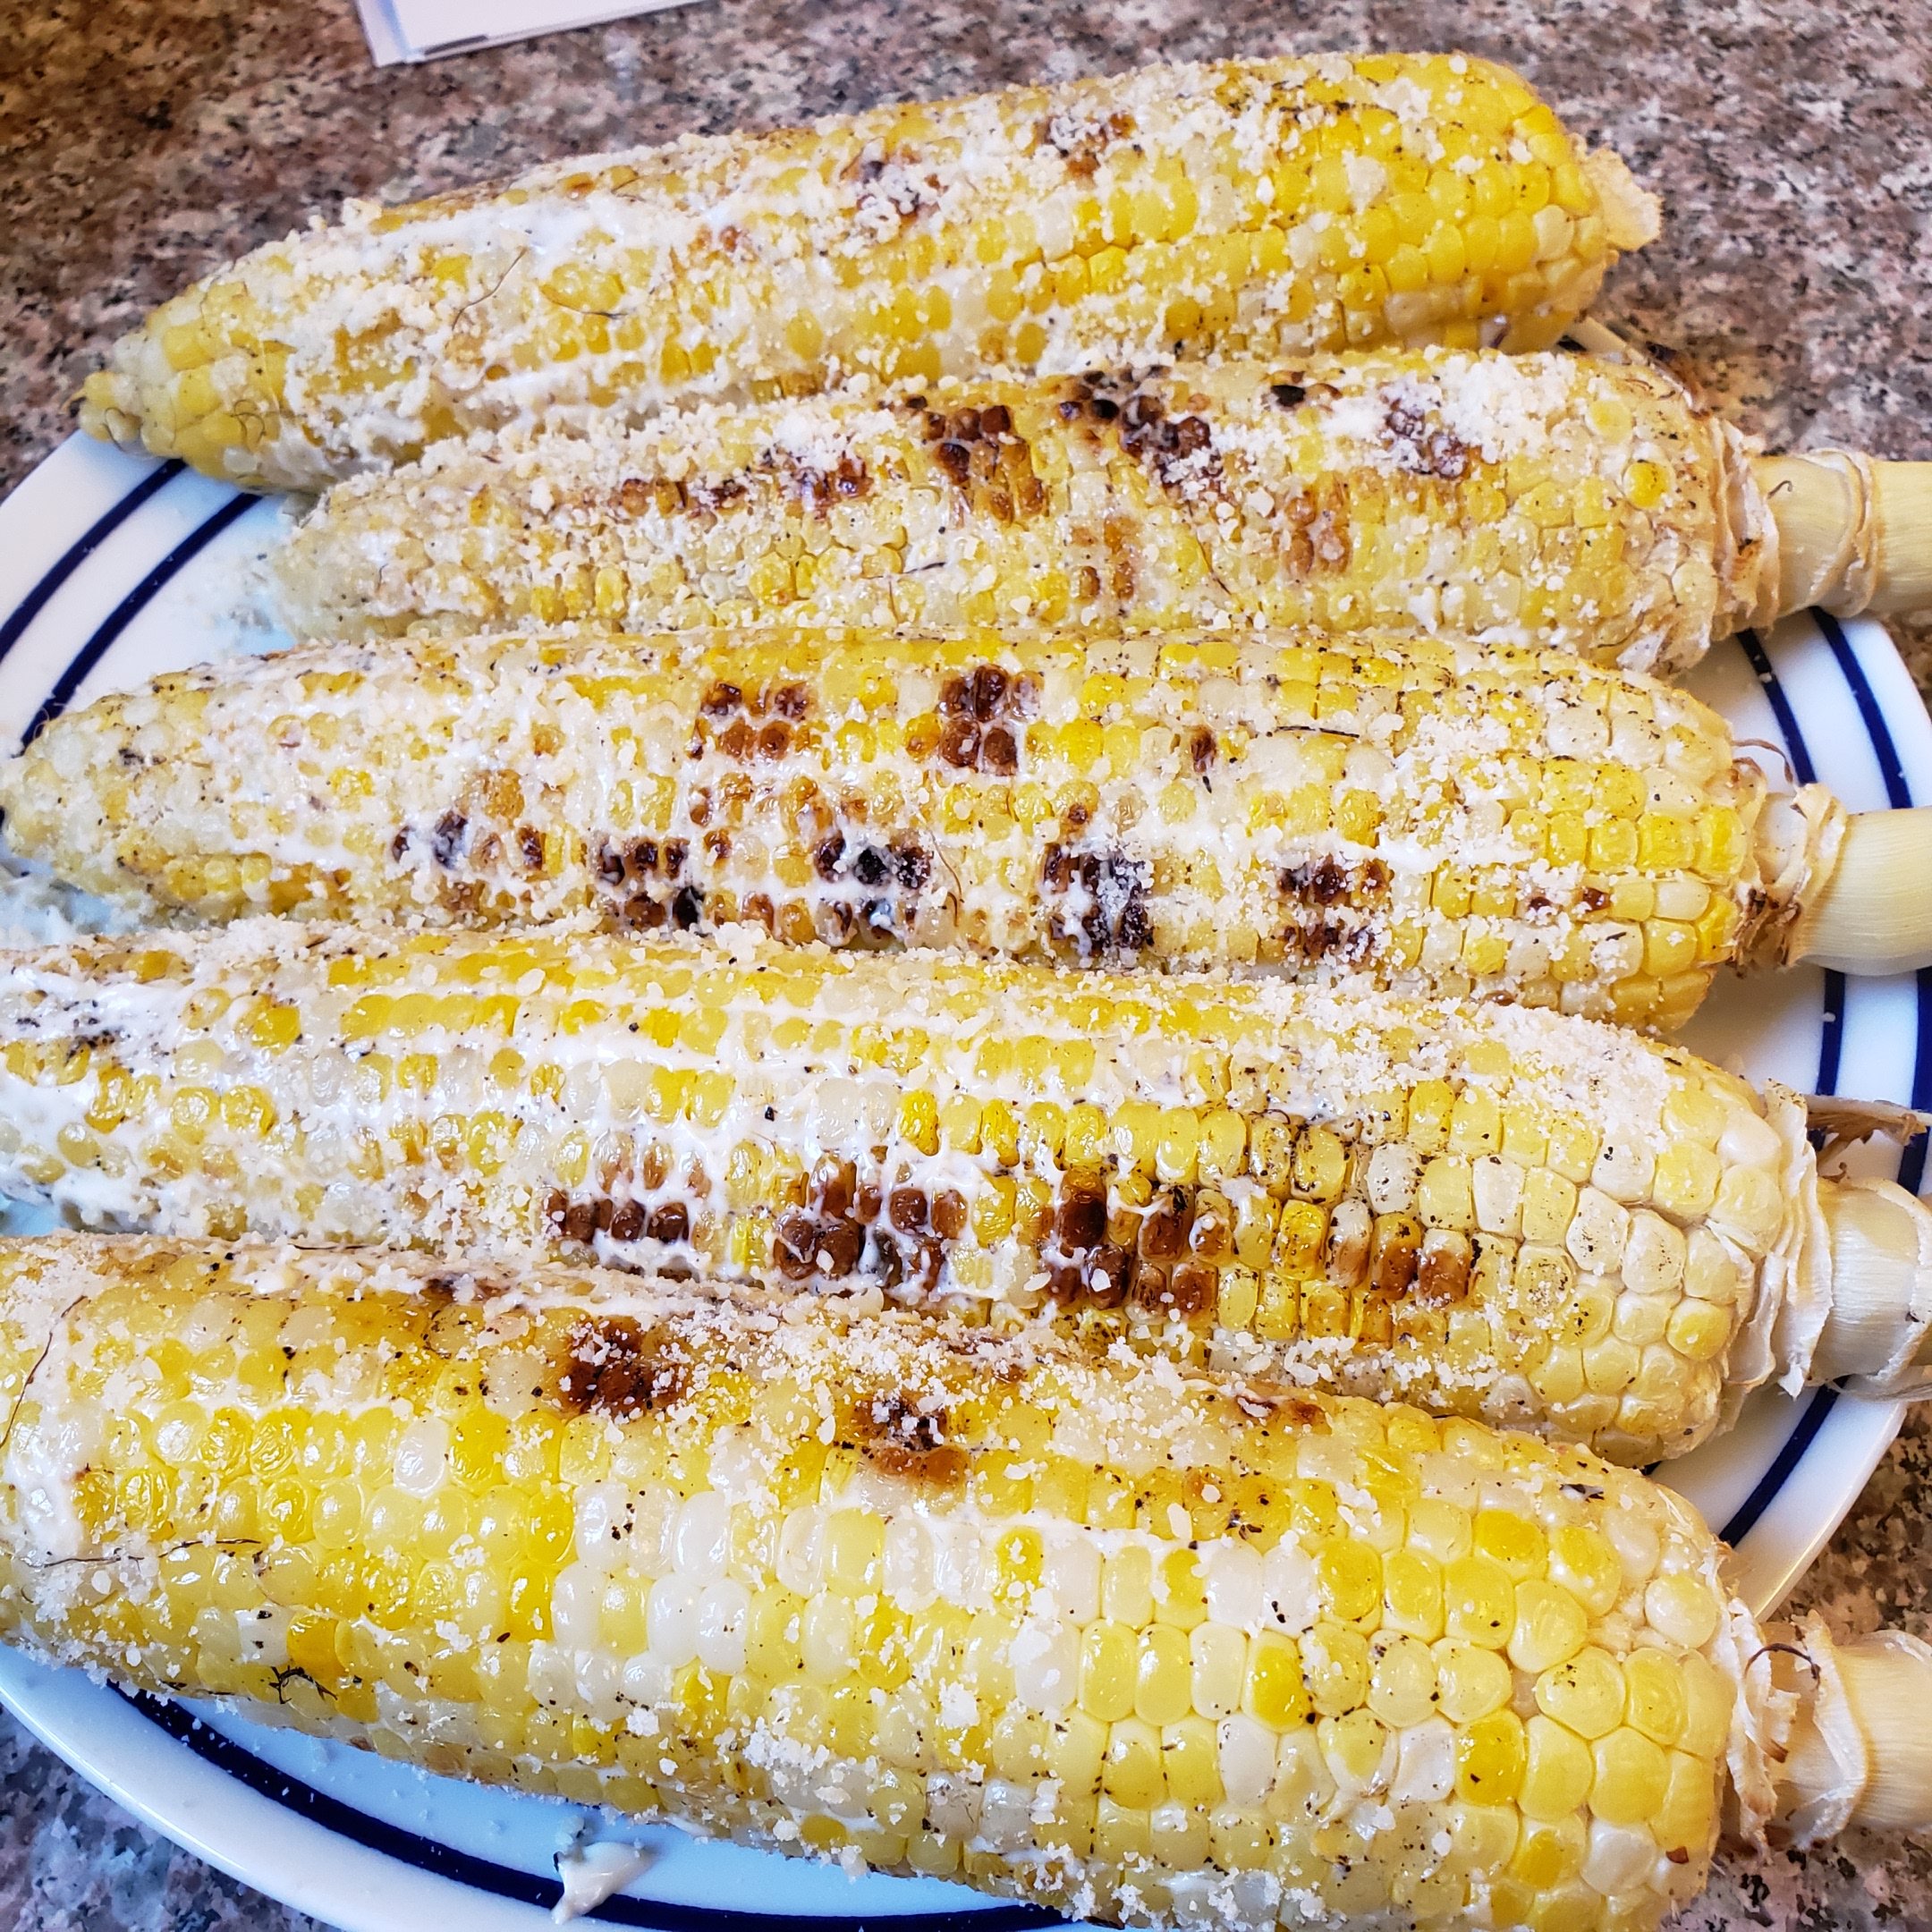 Grilled Mexican Street Corn (Elote) - Once Upon a Chef